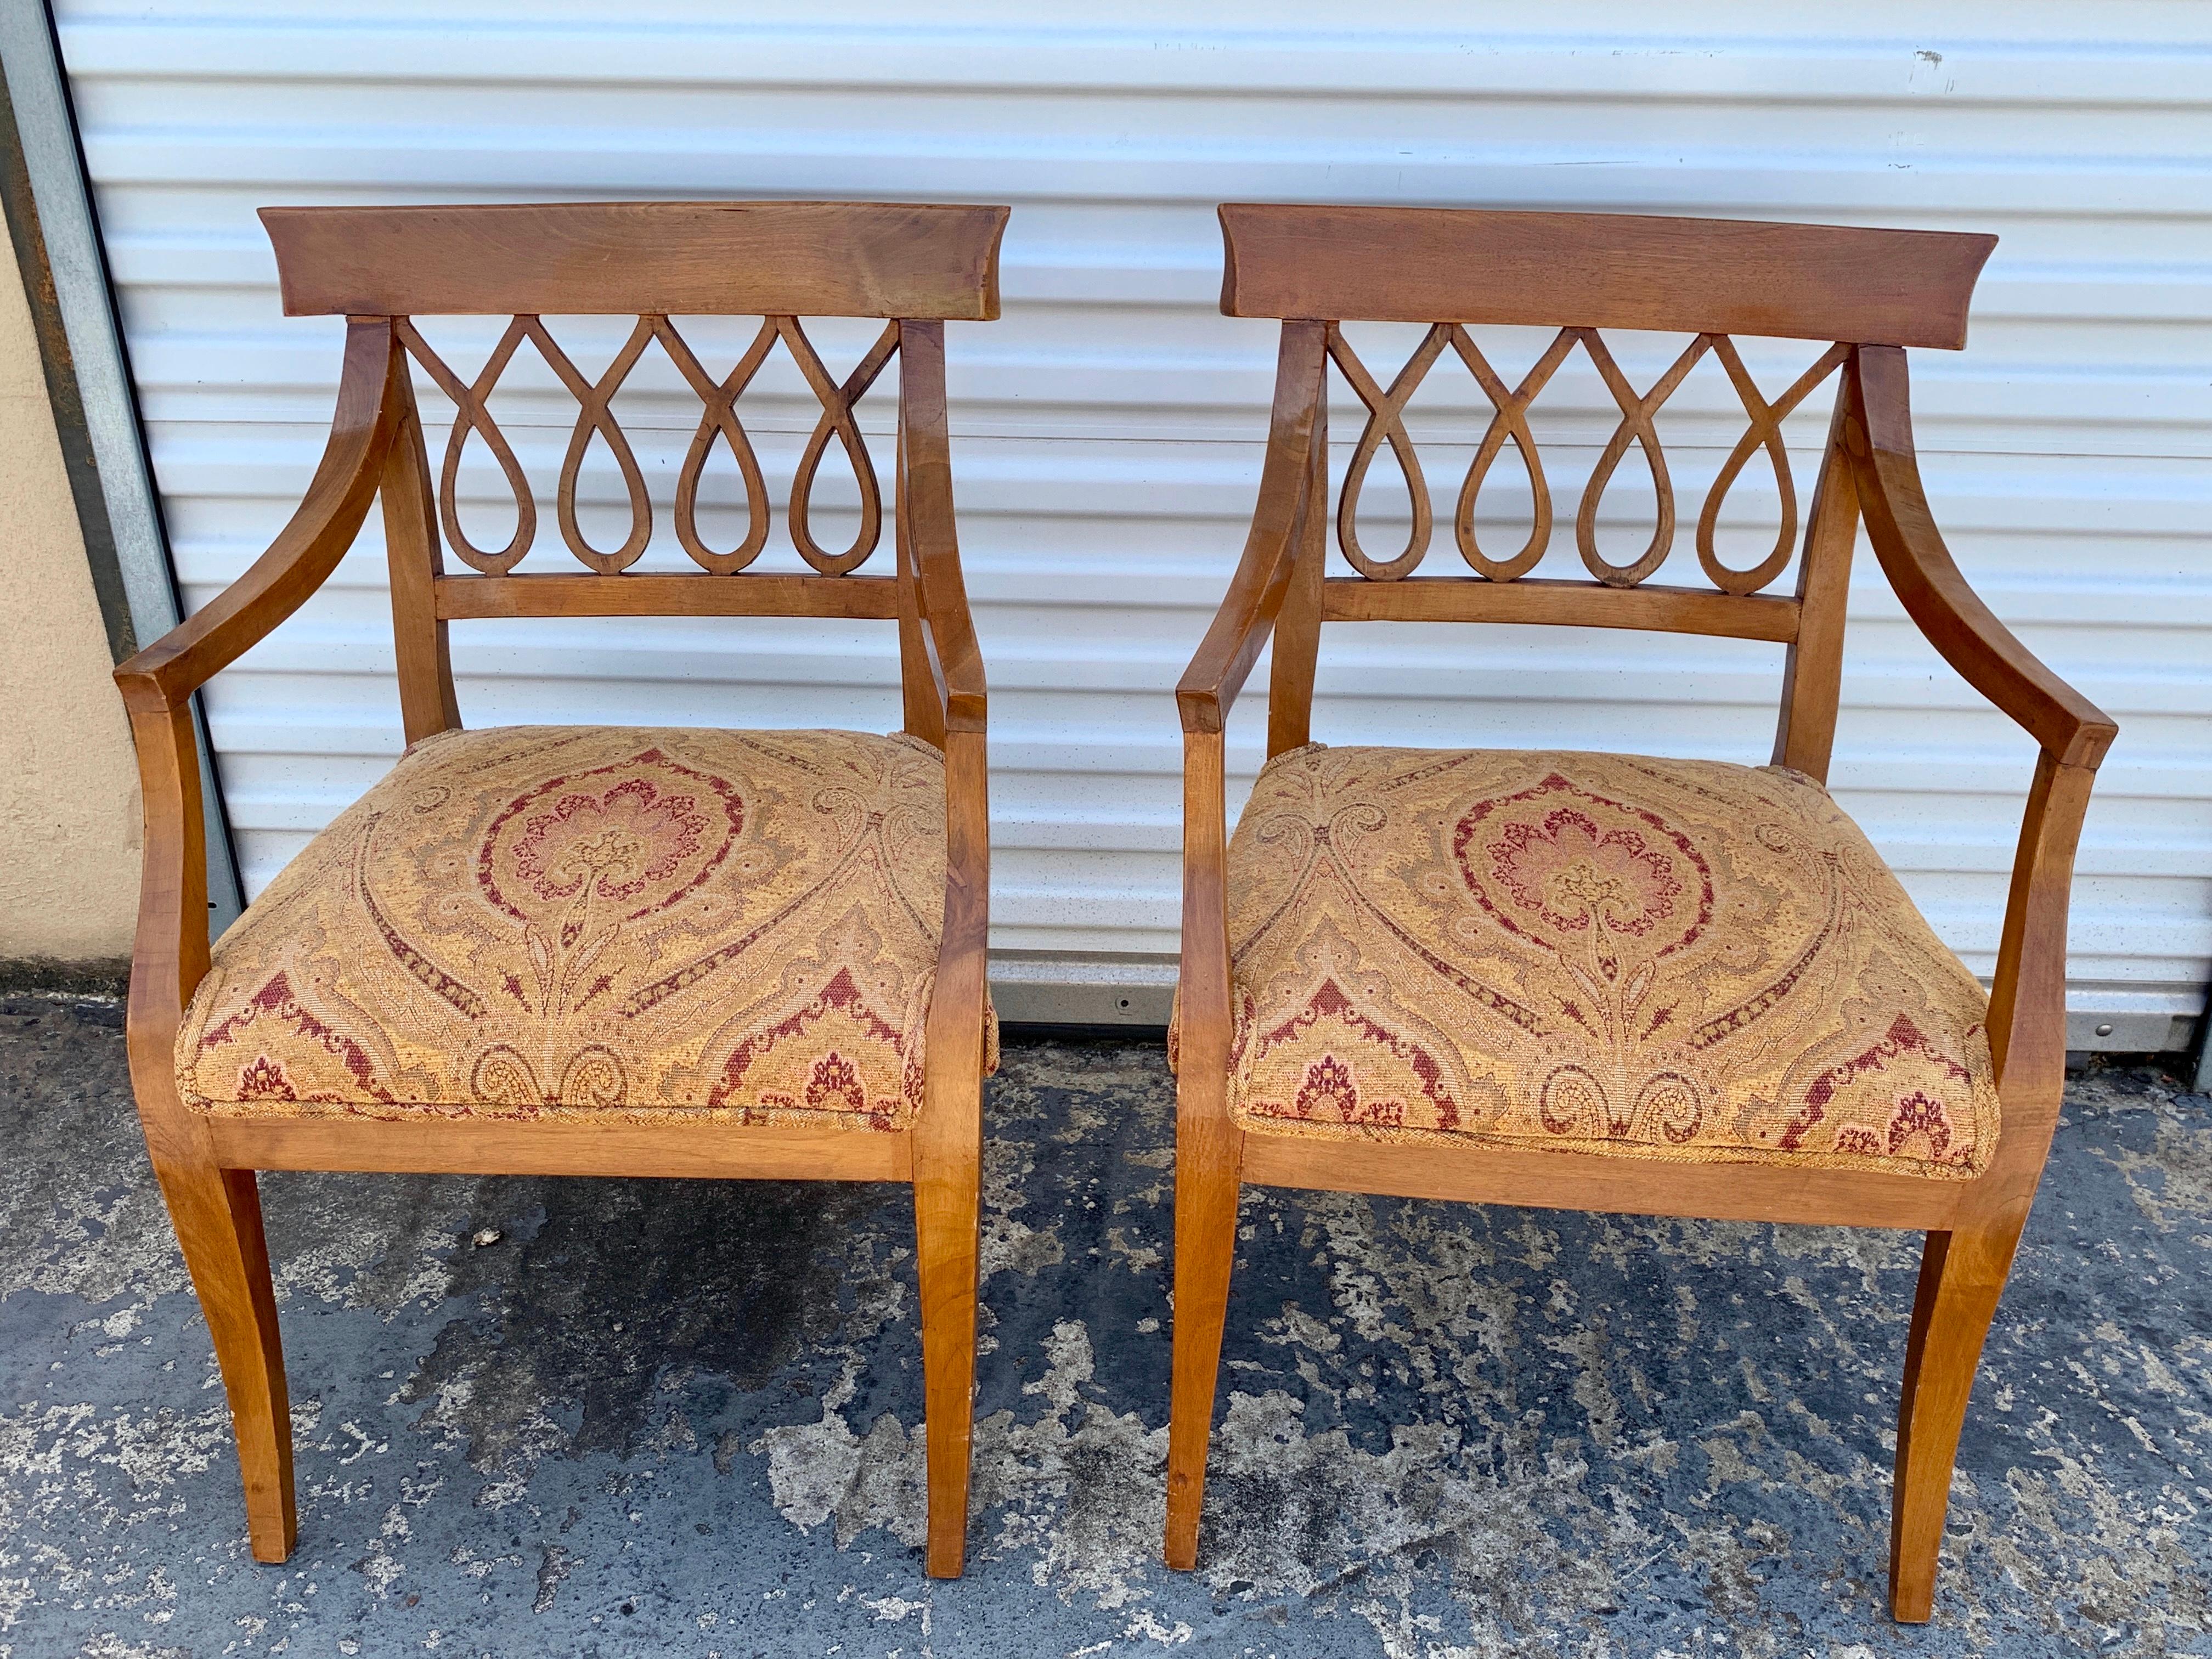 Pair of Italian neoclassic olive wood armchairs, each one with undulating backrests, and upholstered seat. Measures: 25